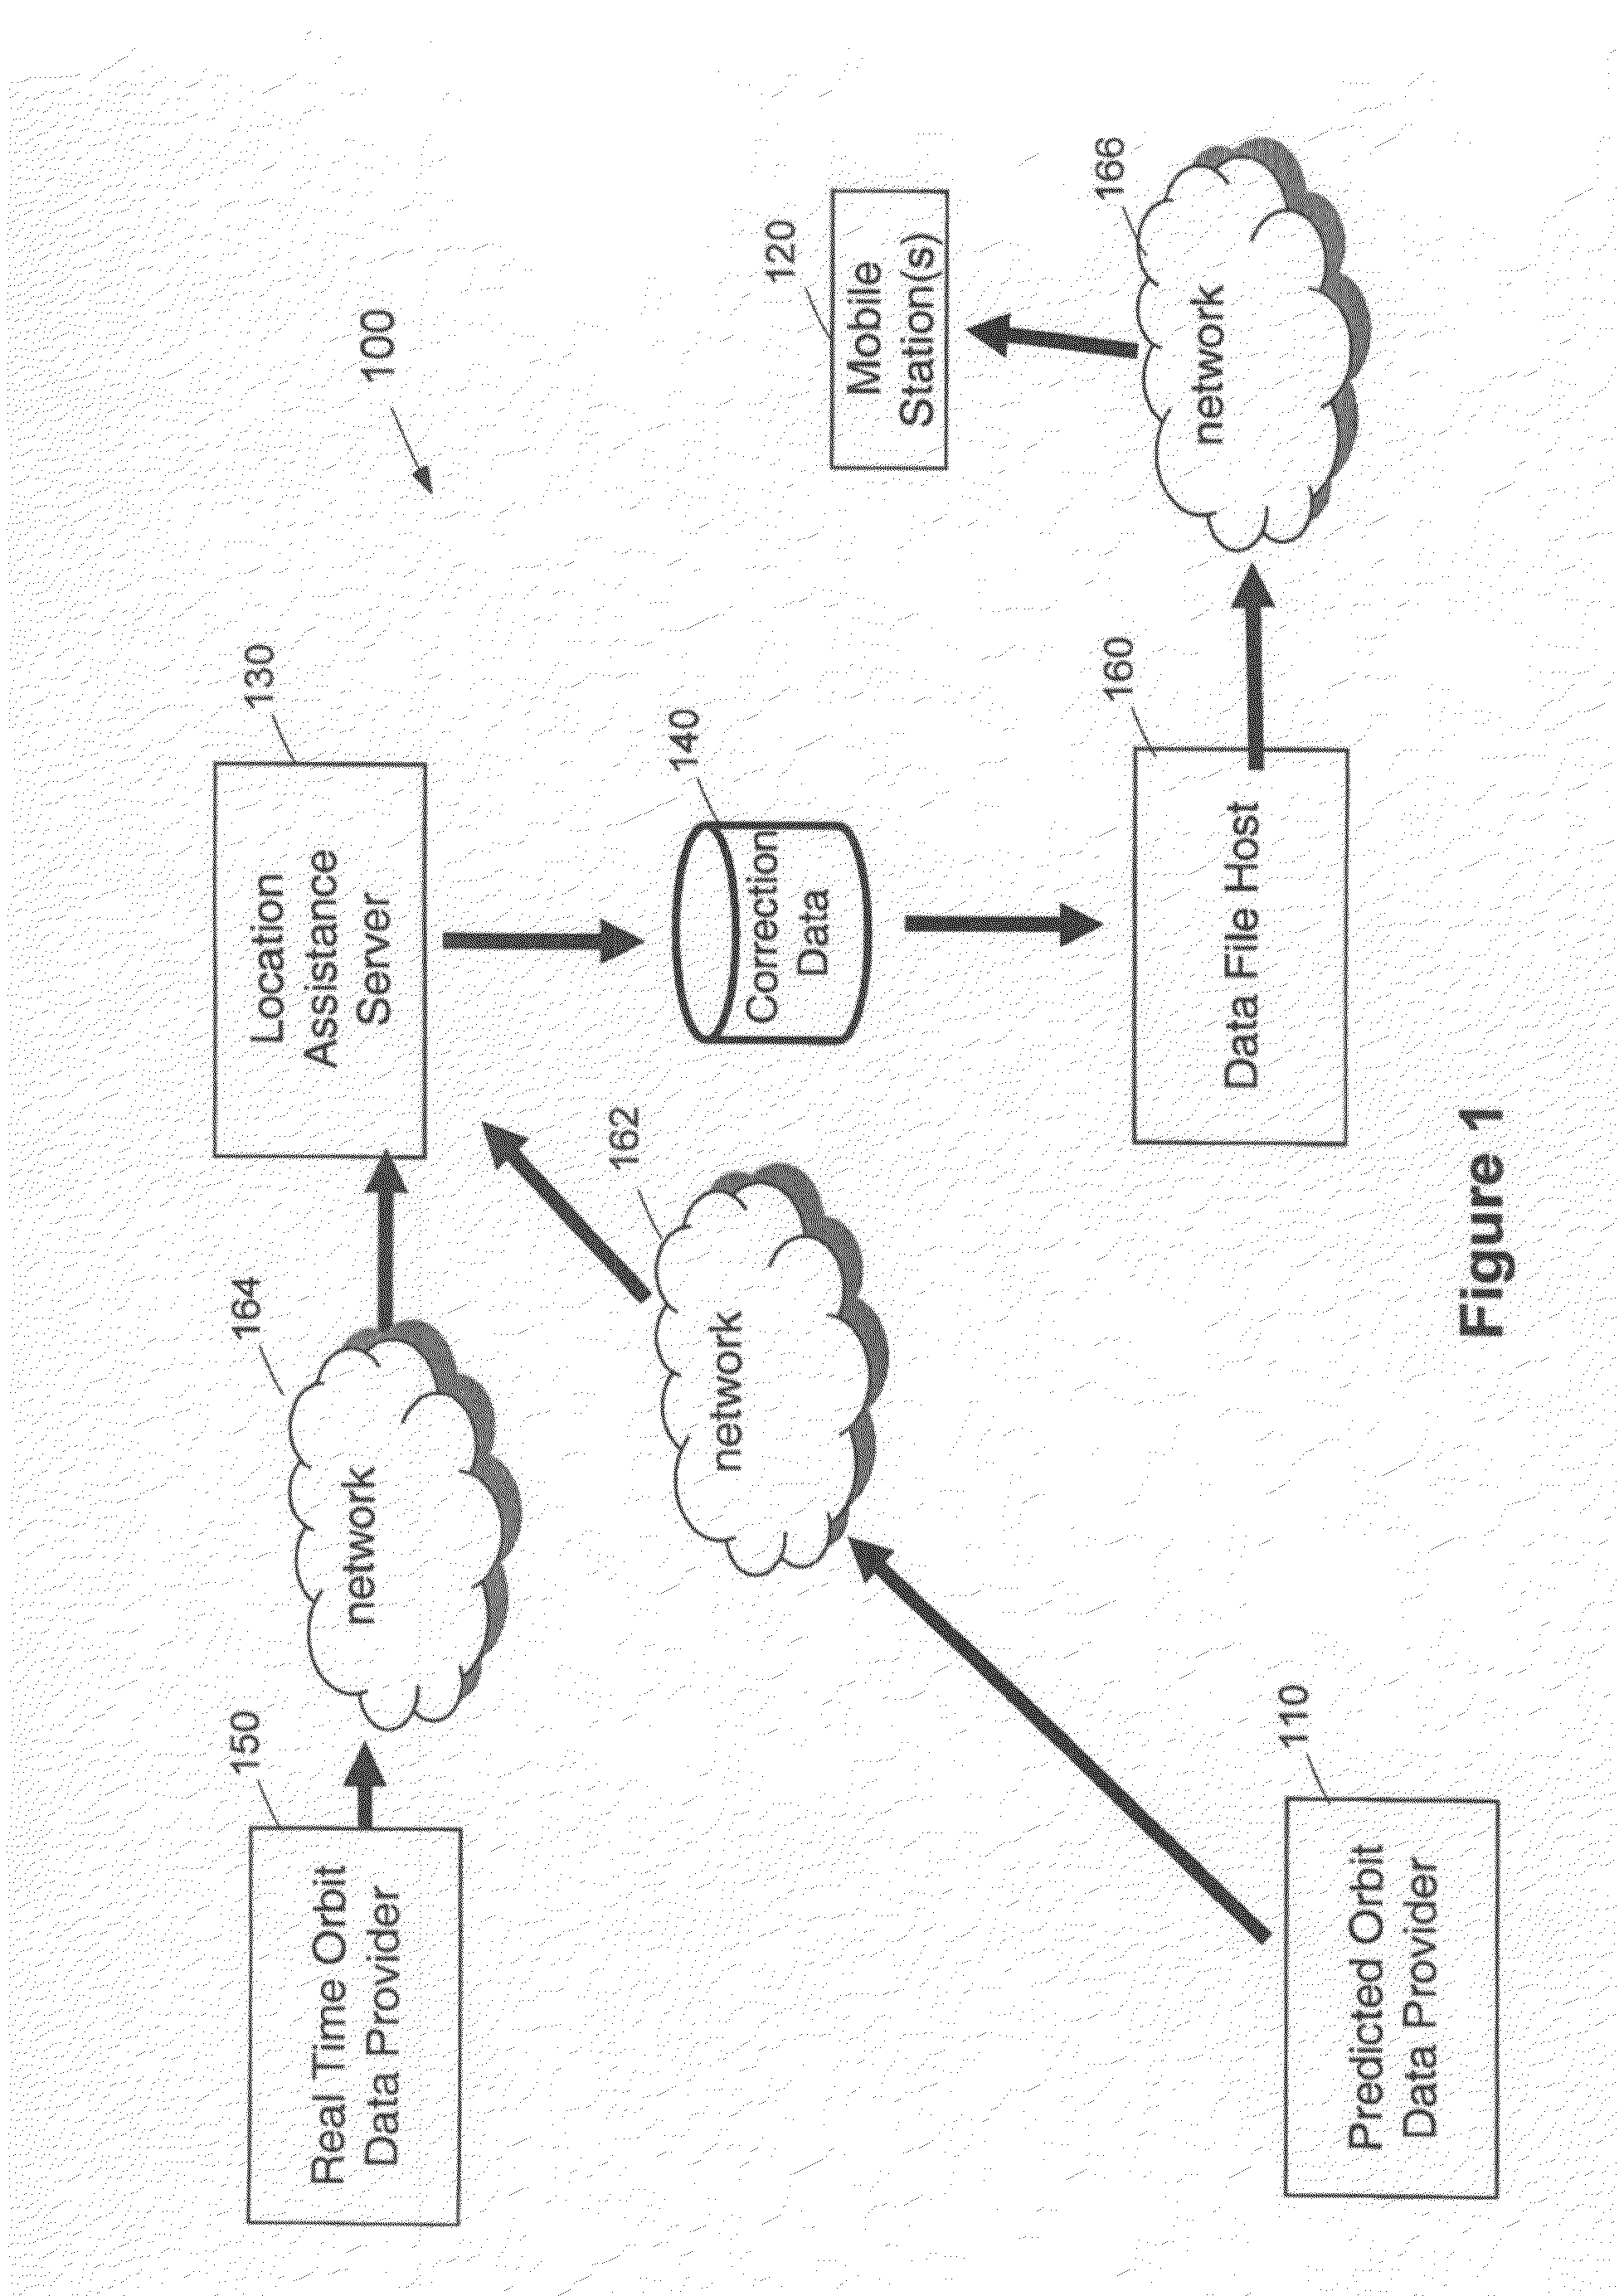 Method and apparatus for position determination with extended sps orbit information